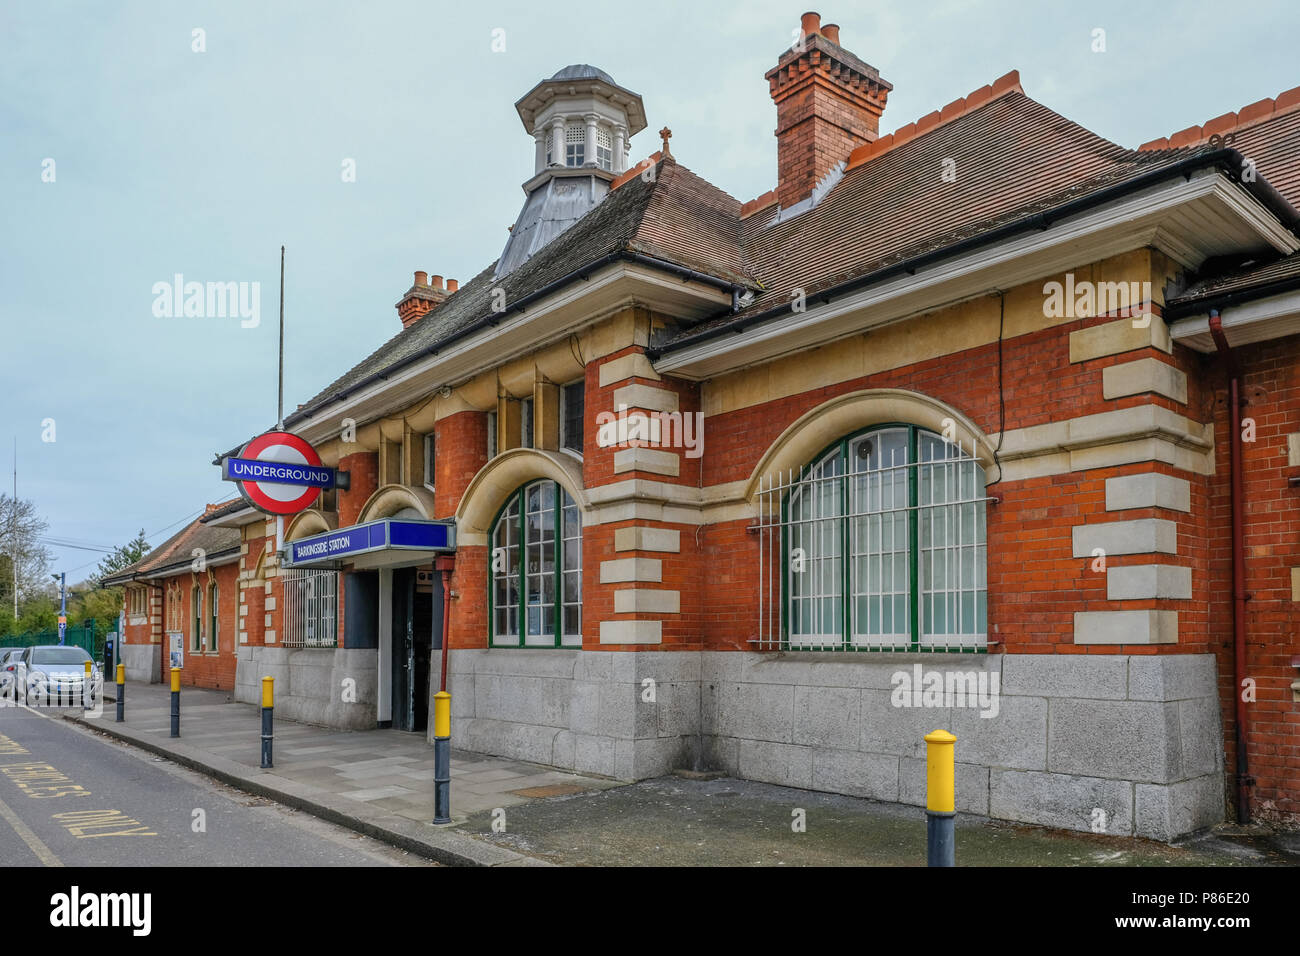 Barkingside, Ilford, Essex, UK - April 6, 2018: Exterior view of Barkingside Underground station with a passenger leaving from the entrance. Stock Photo